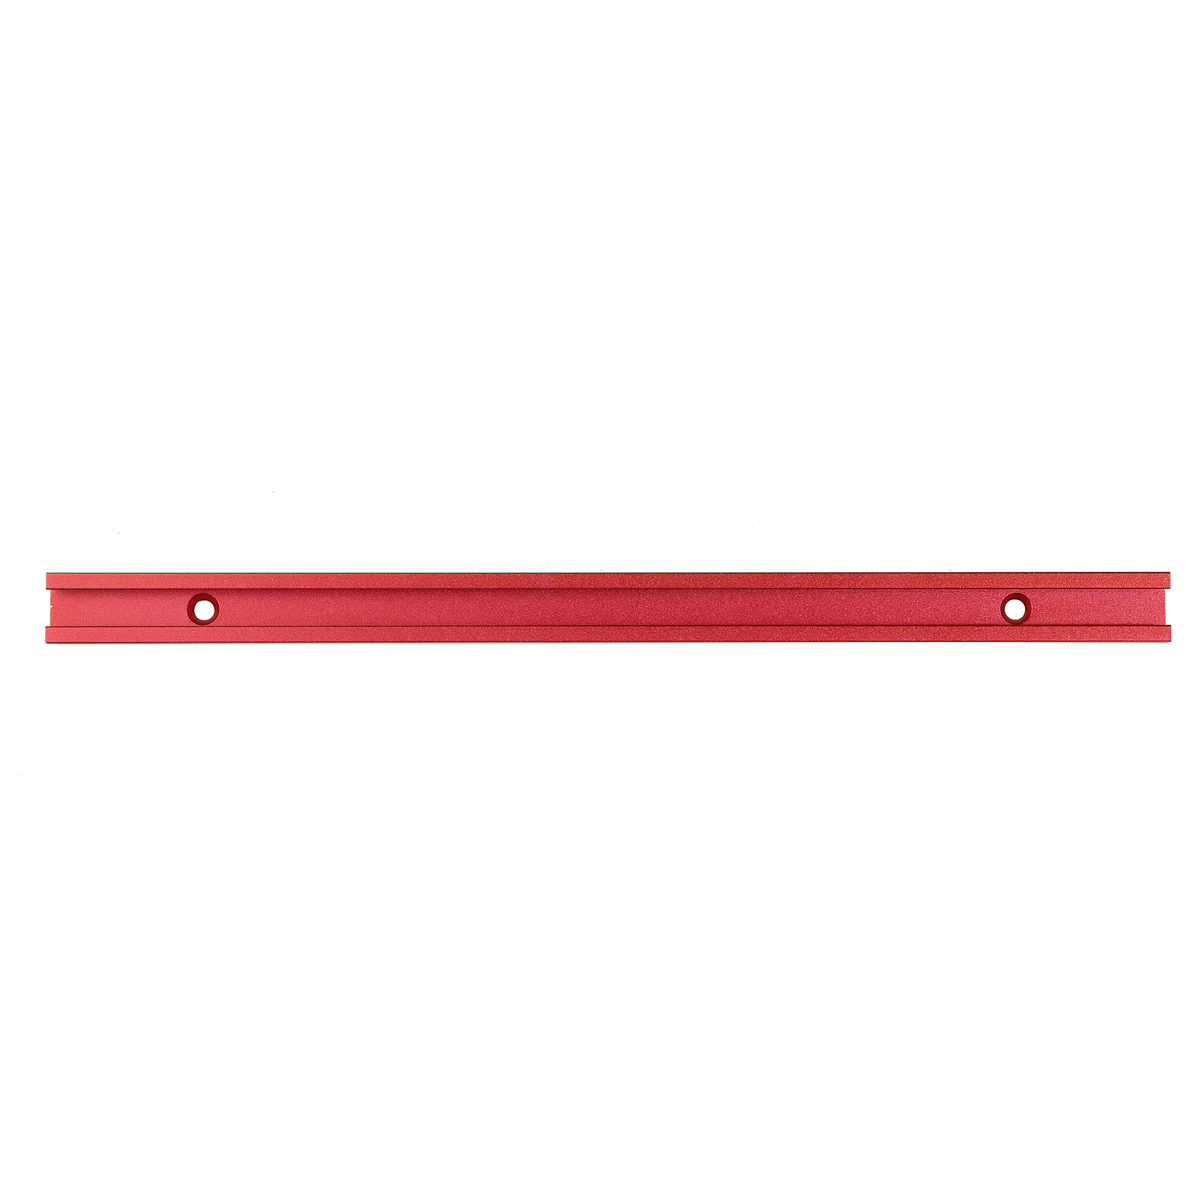 Red-Aluminum-Alloy-300-1220mm-T-track-T-slot-Miter-Track-Jig-T-Screw-Fixture-Slot-19x95mm-For-Table--1682608-4